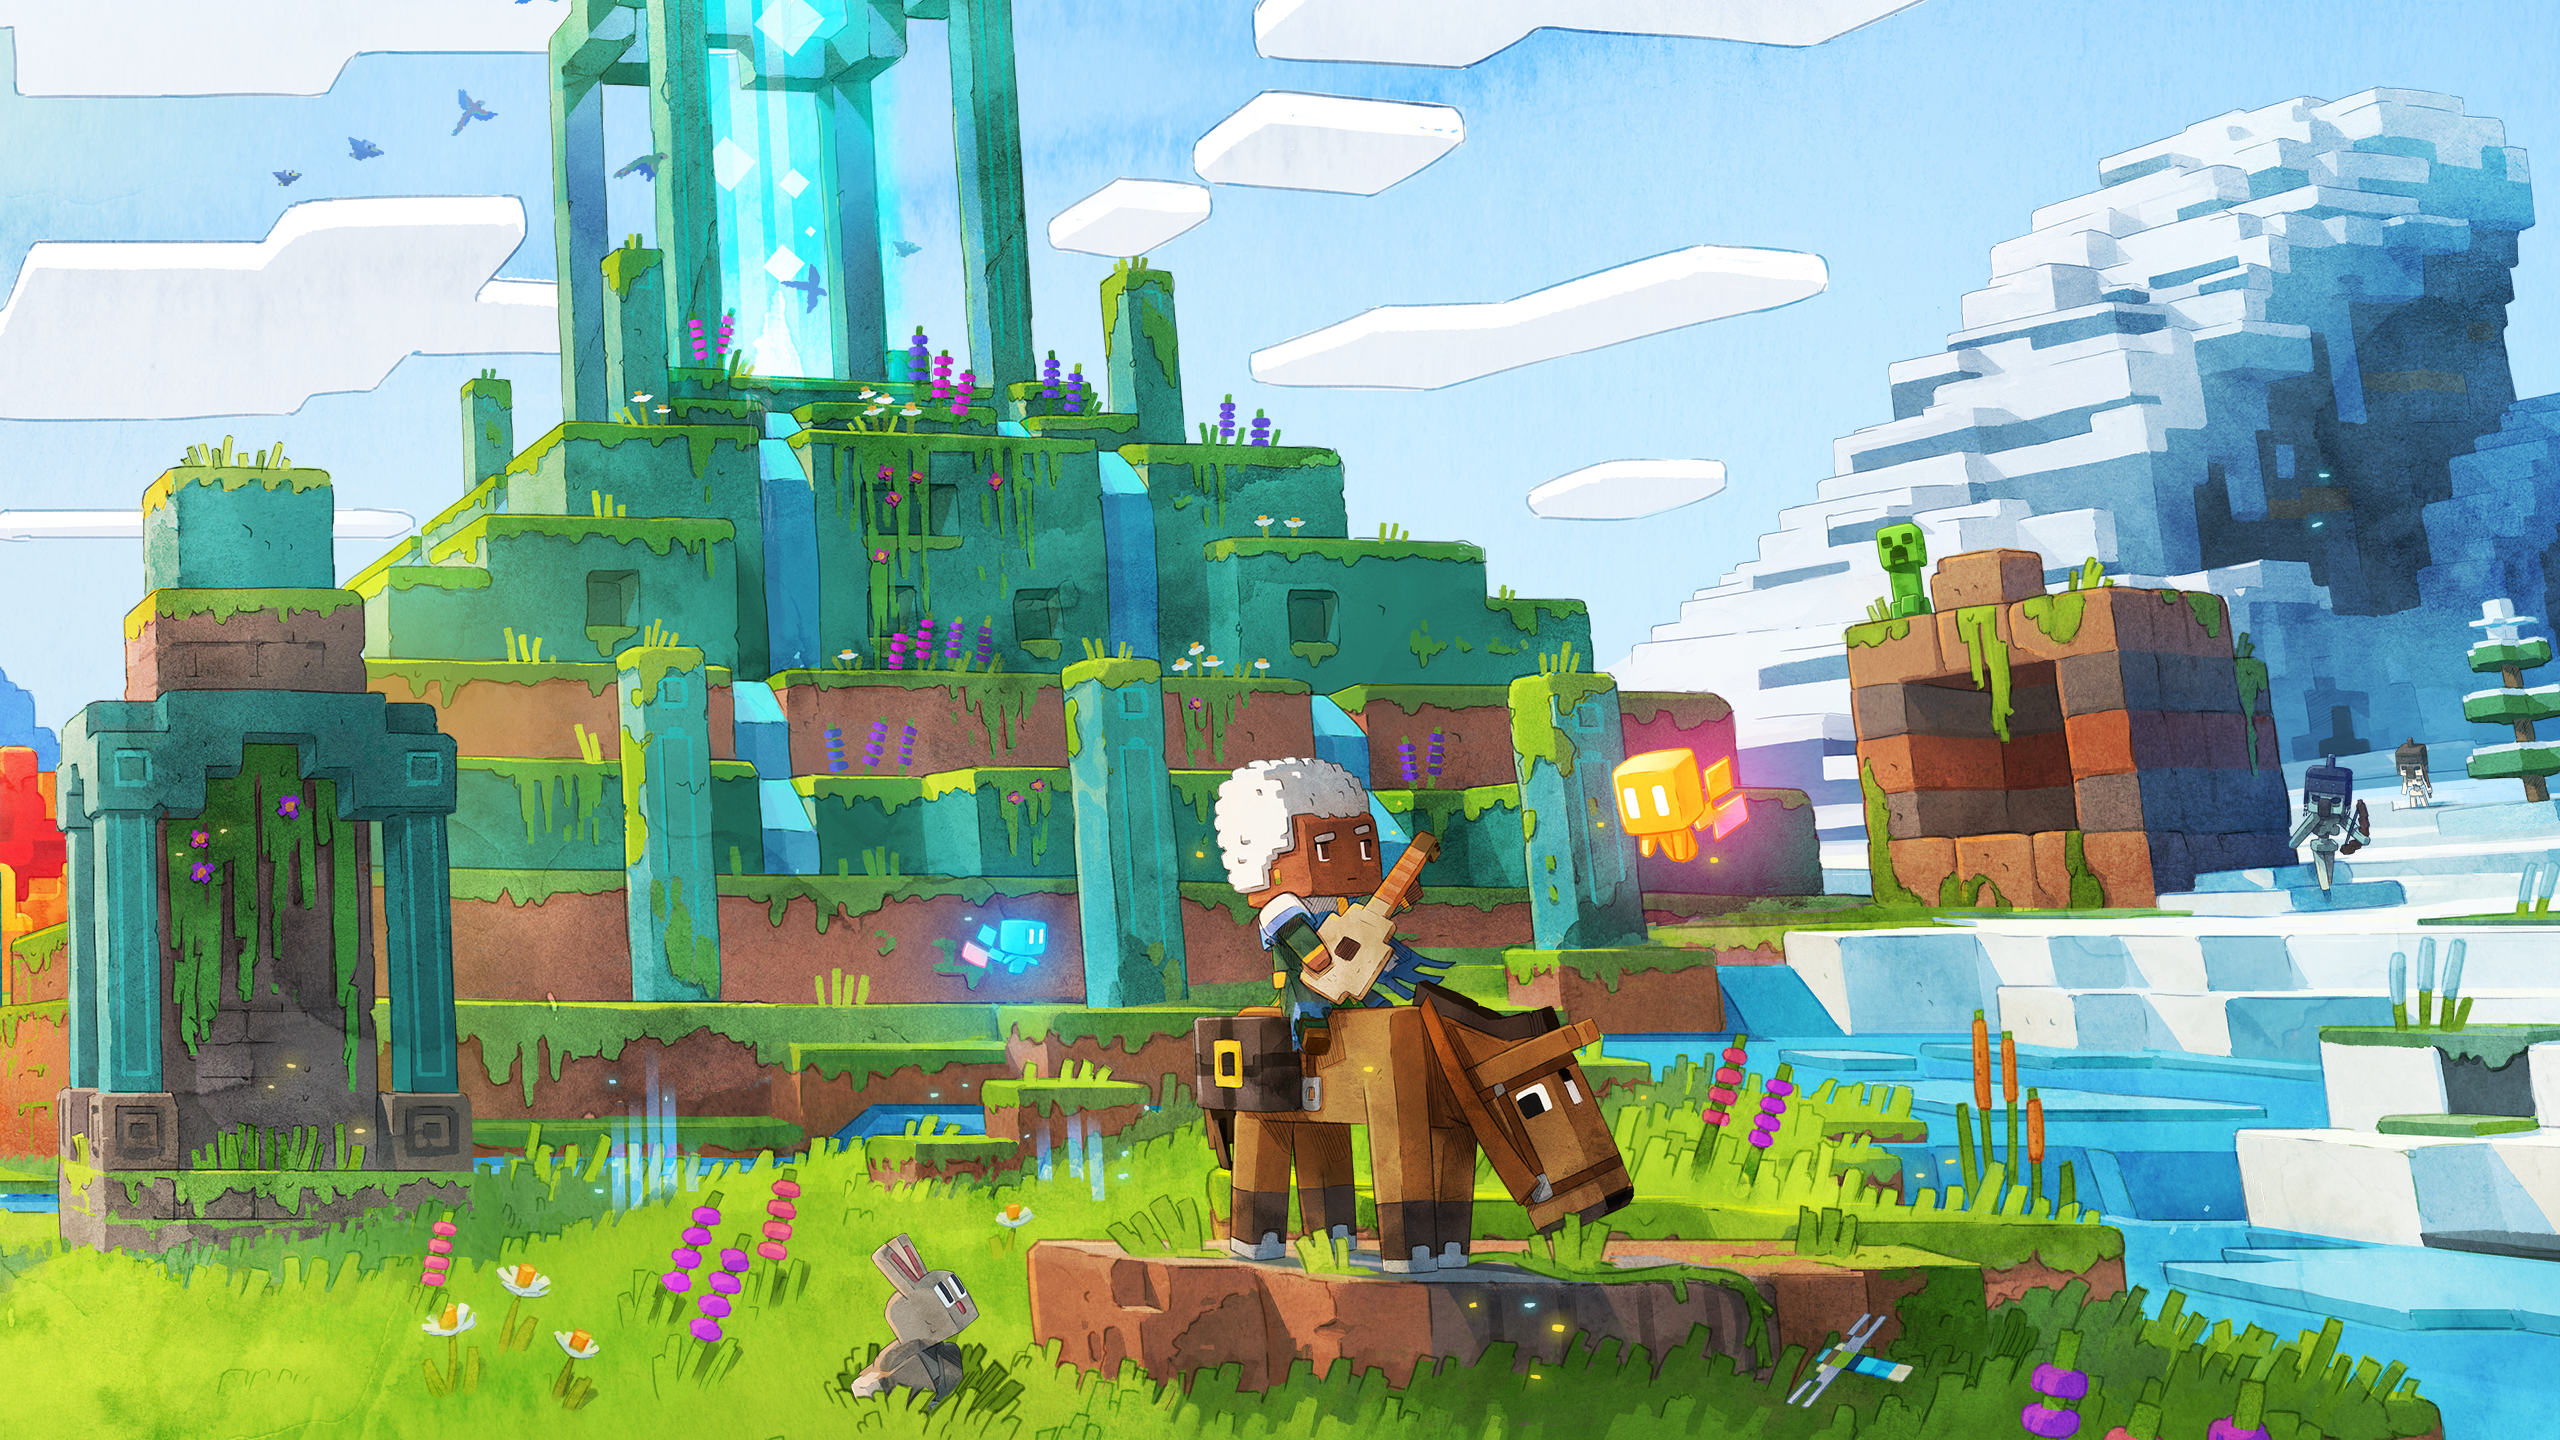 Minecraft Legends HD Desktop Wallpaper featuring lush landscapes and a character riding a pig.